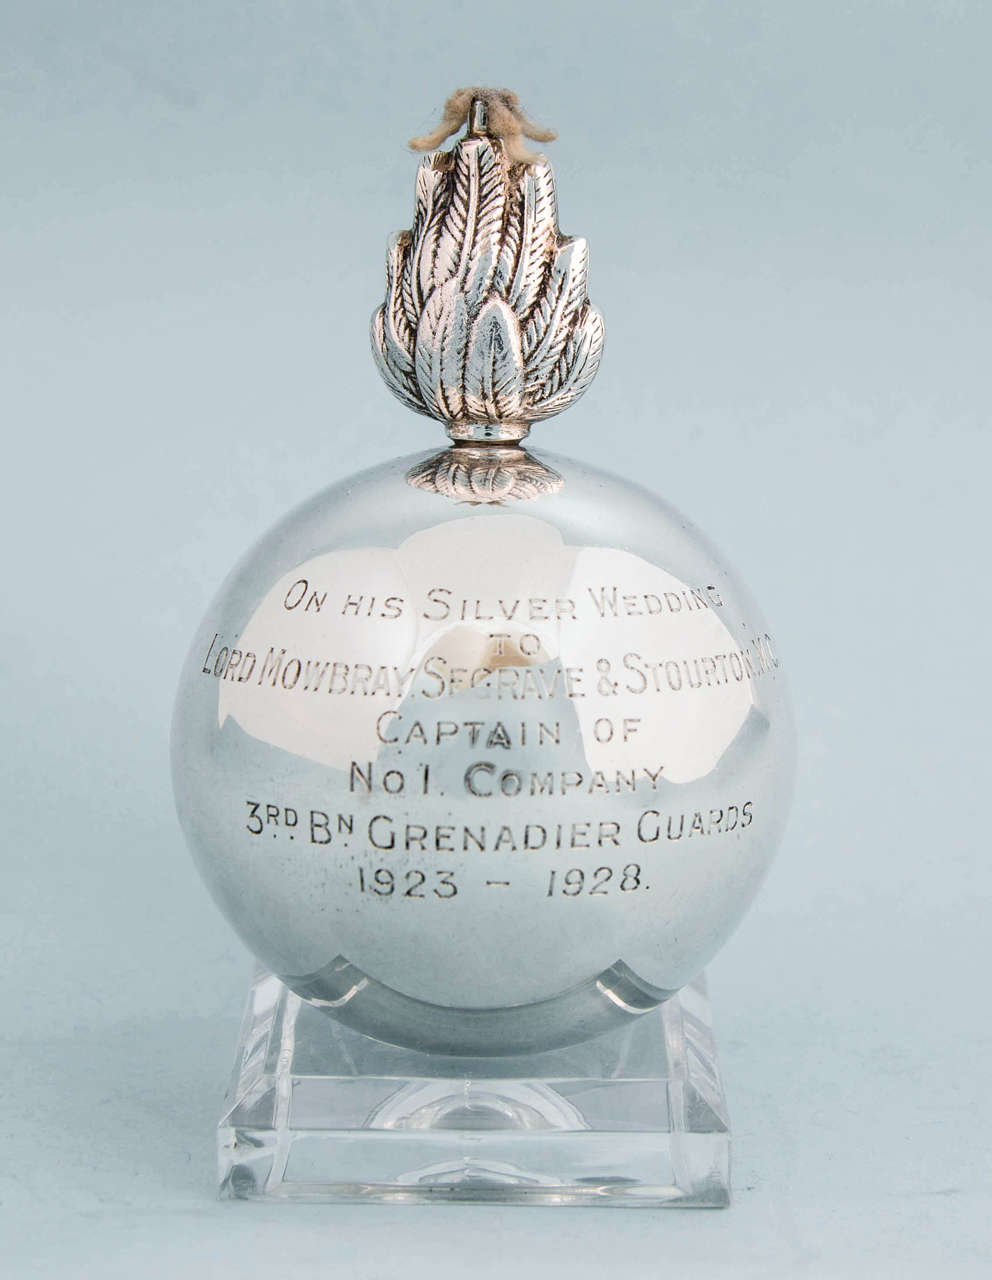 Interesting grenade-shaped sterling silver table cigar lighter,
Birmingham, 1932.

Engraved: 'On his silver wedding to Lord Mowbray, Segrave and Stourton, M C Captain of No 1 Company 3rd Bn Grenadier Guards 1923-1928.'

This lighter of military